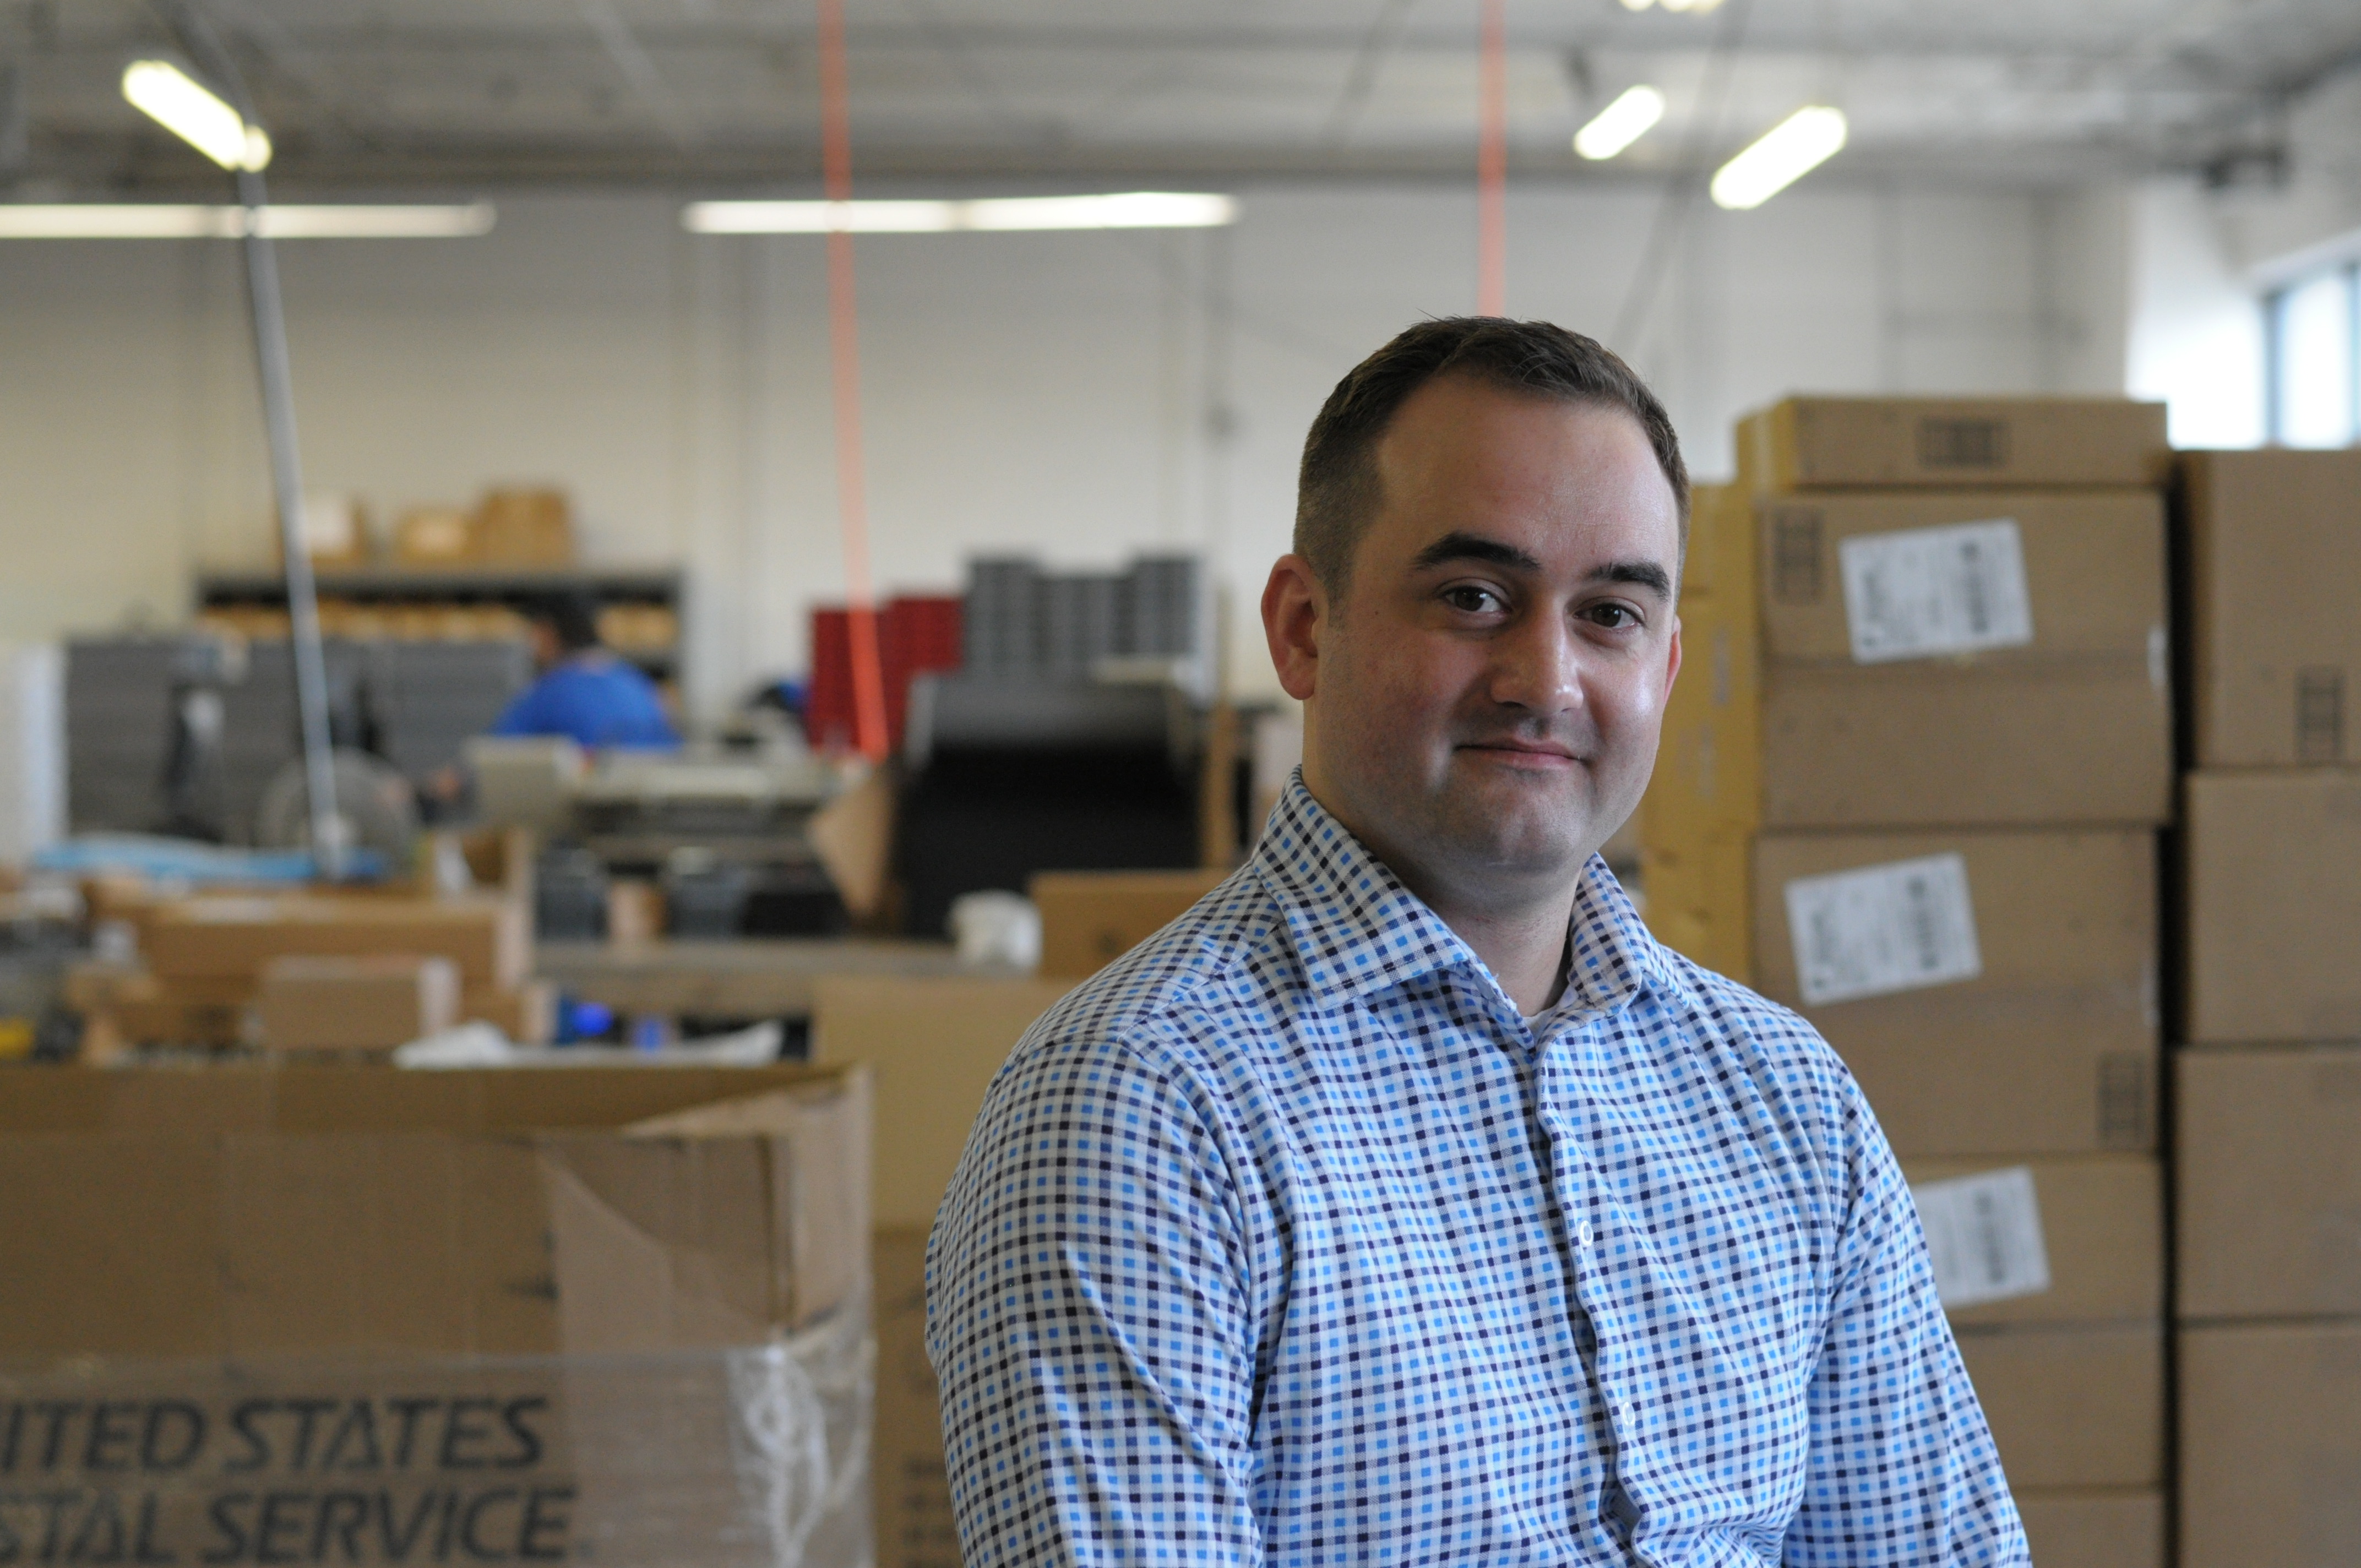 Jason Lindberg joins eFulfillment Service as director of expansion, leading the company transformation of warehousing structure, process and technology.